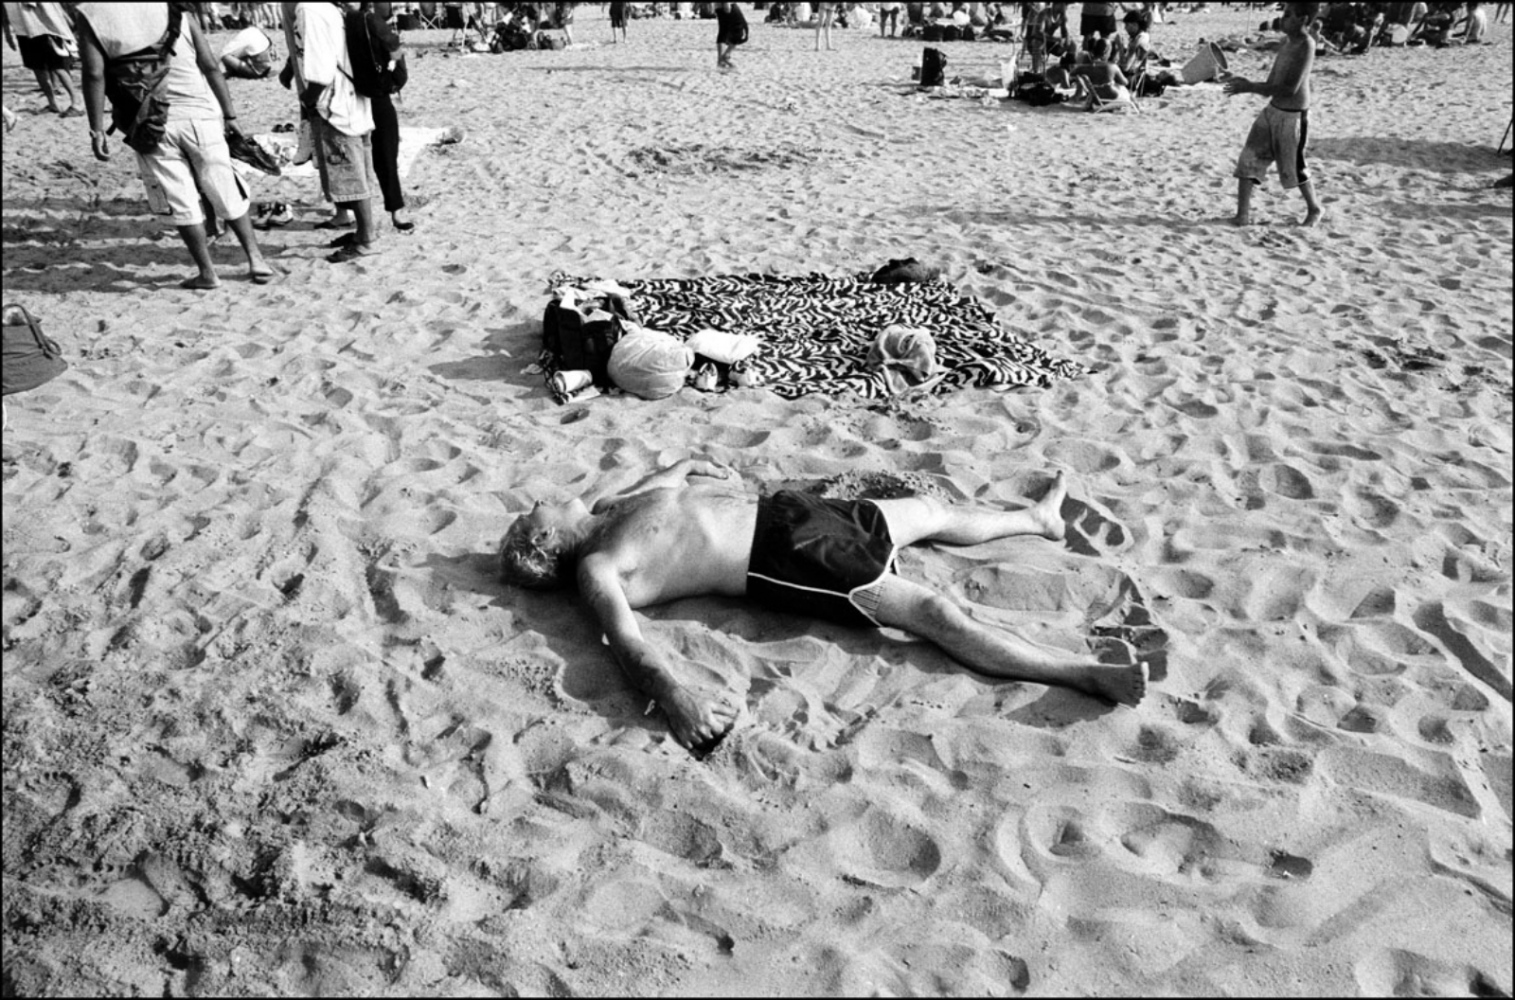 Coney Island 2004 -  Making Angels in the Sand, Coney Island, NY, July 4,...